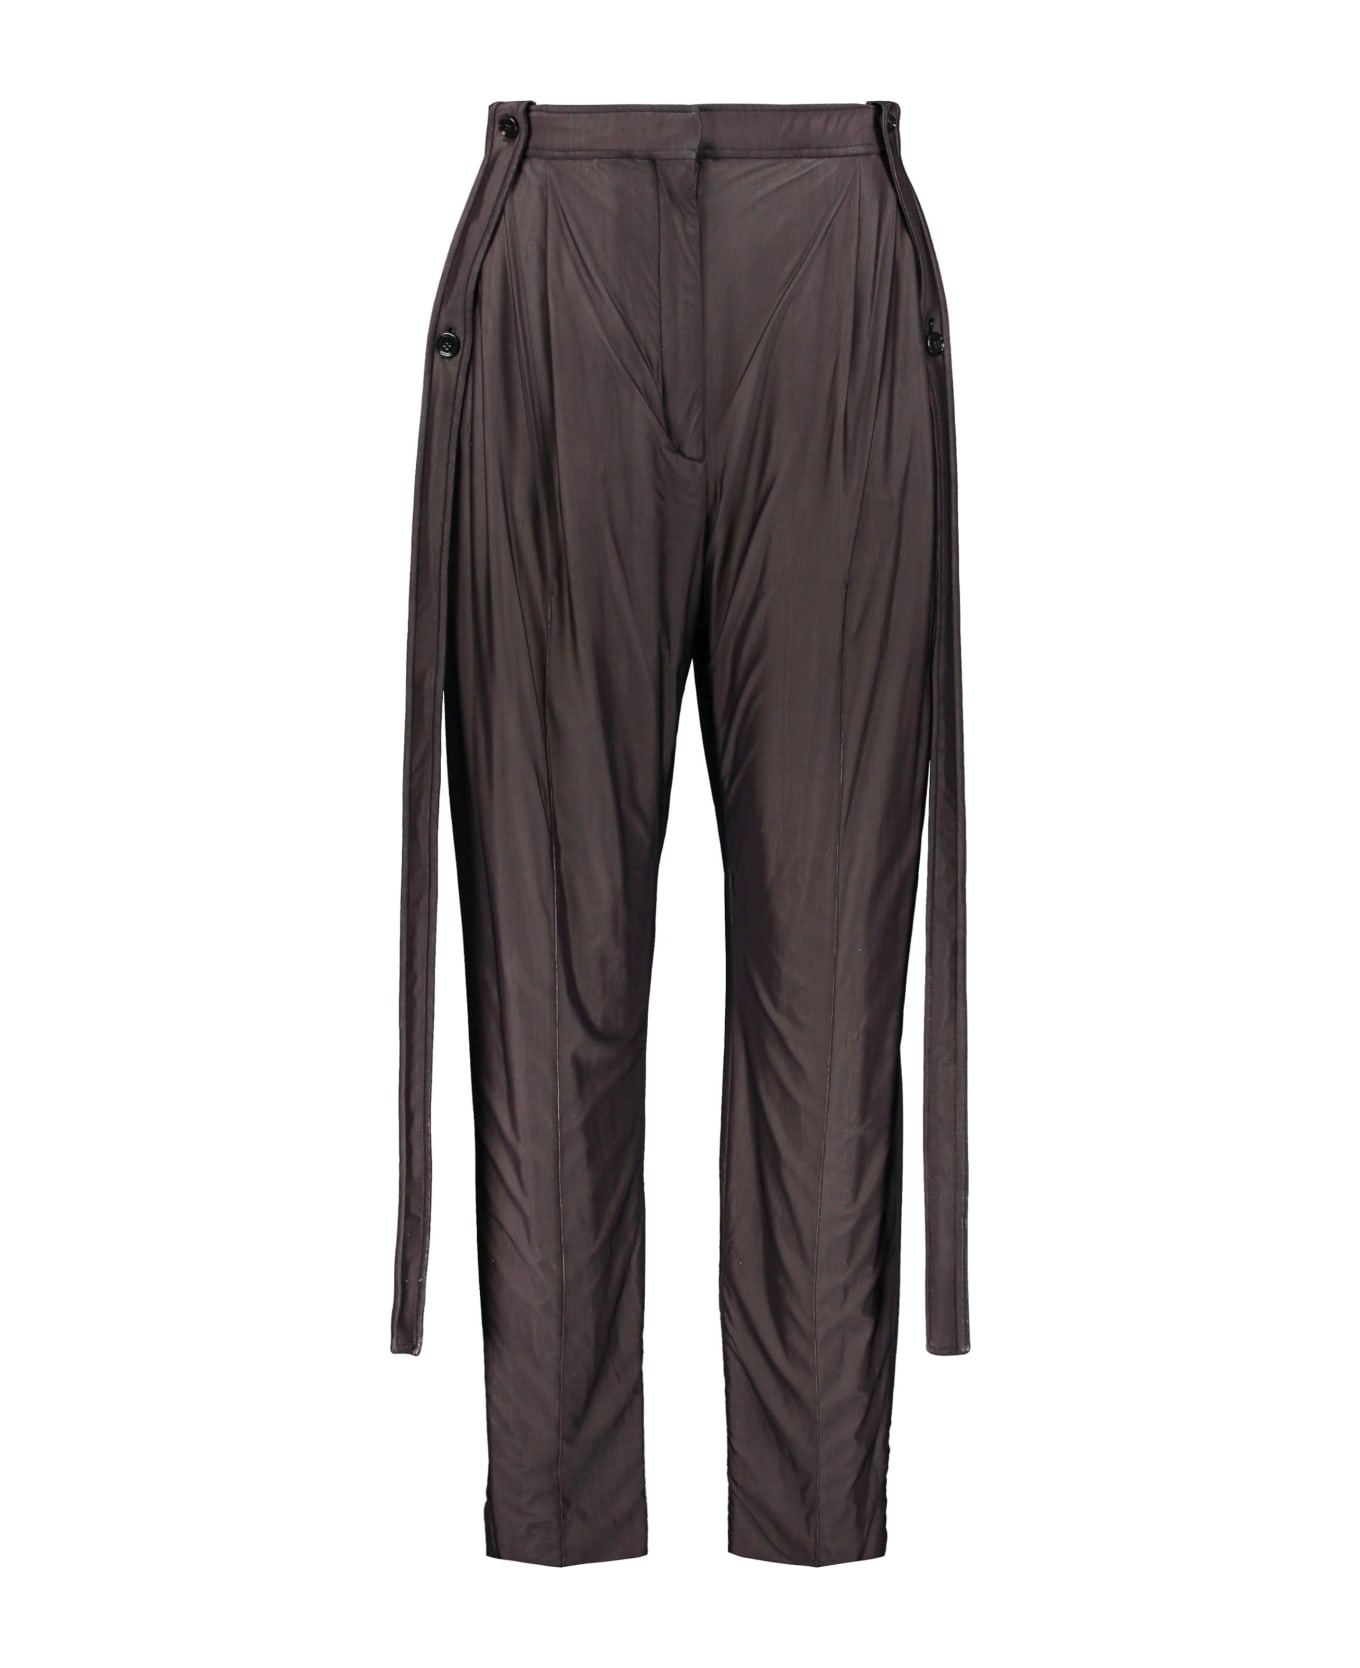 Burberry Technical Fabric Pants - brown ボトムス